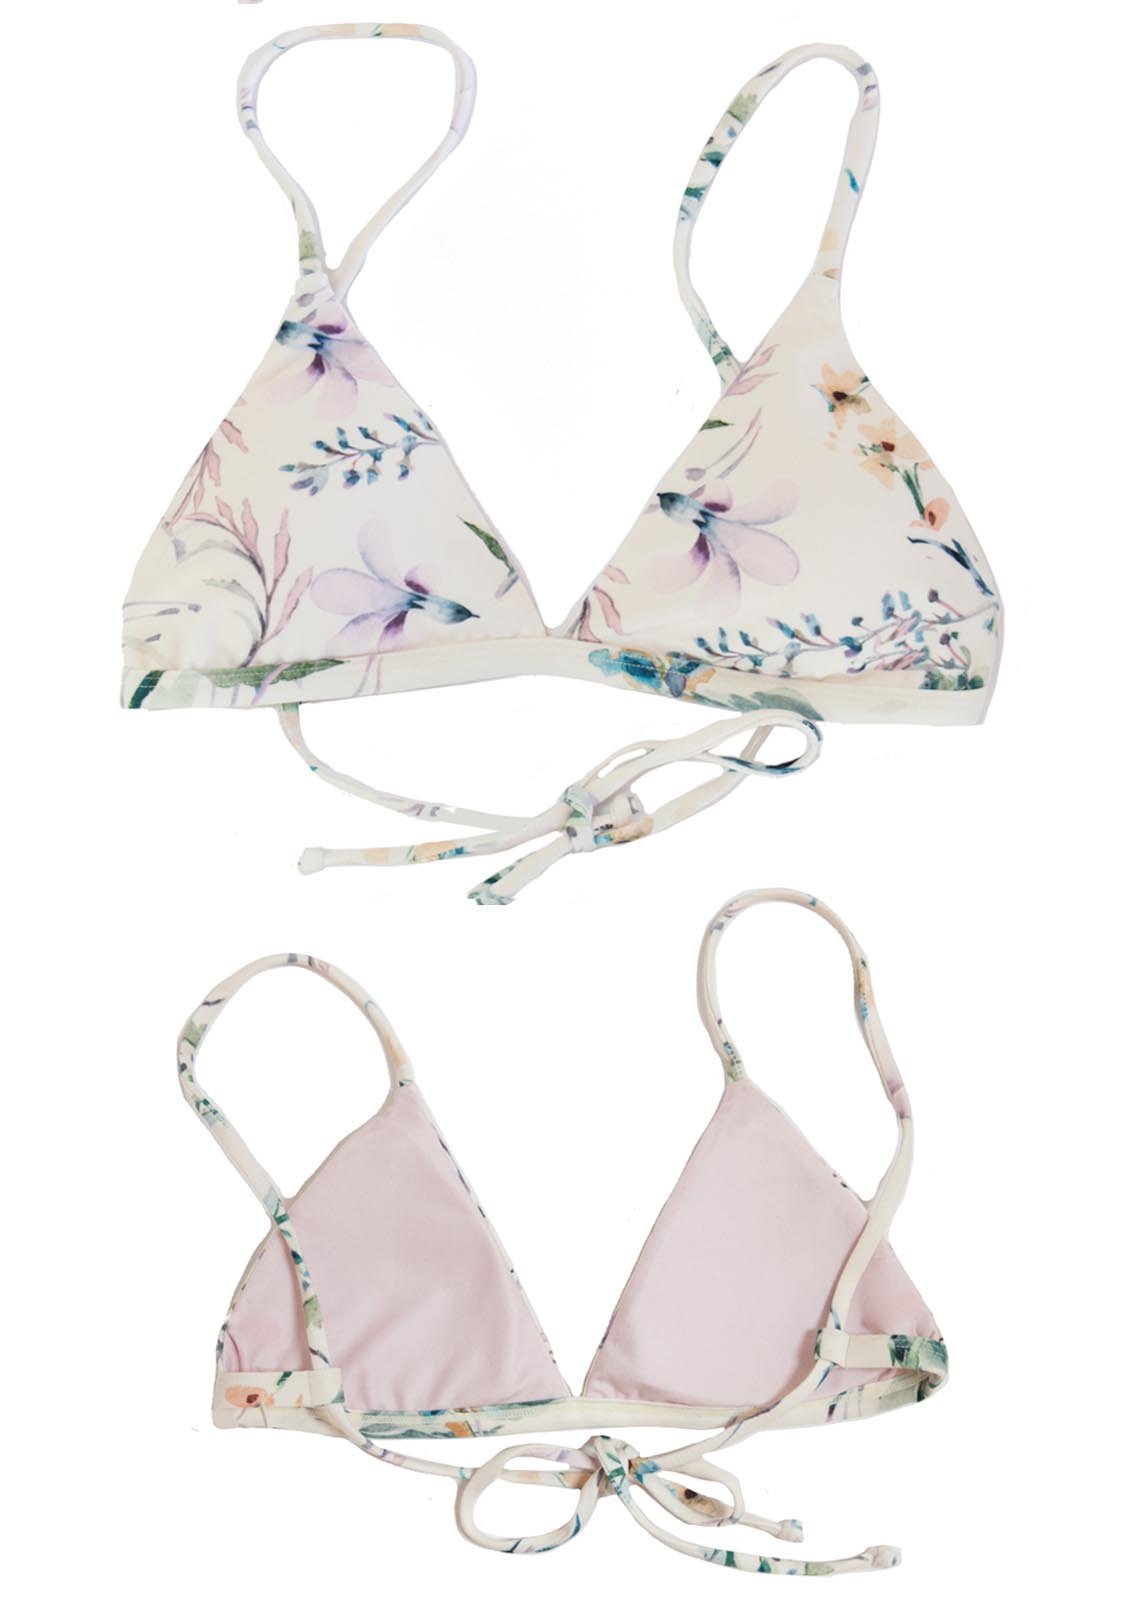 Beautiful Floral Triangle Bikini Top from the latest "Isla Collection", with rose colored pattern, made by Chance Loves Swimwear.